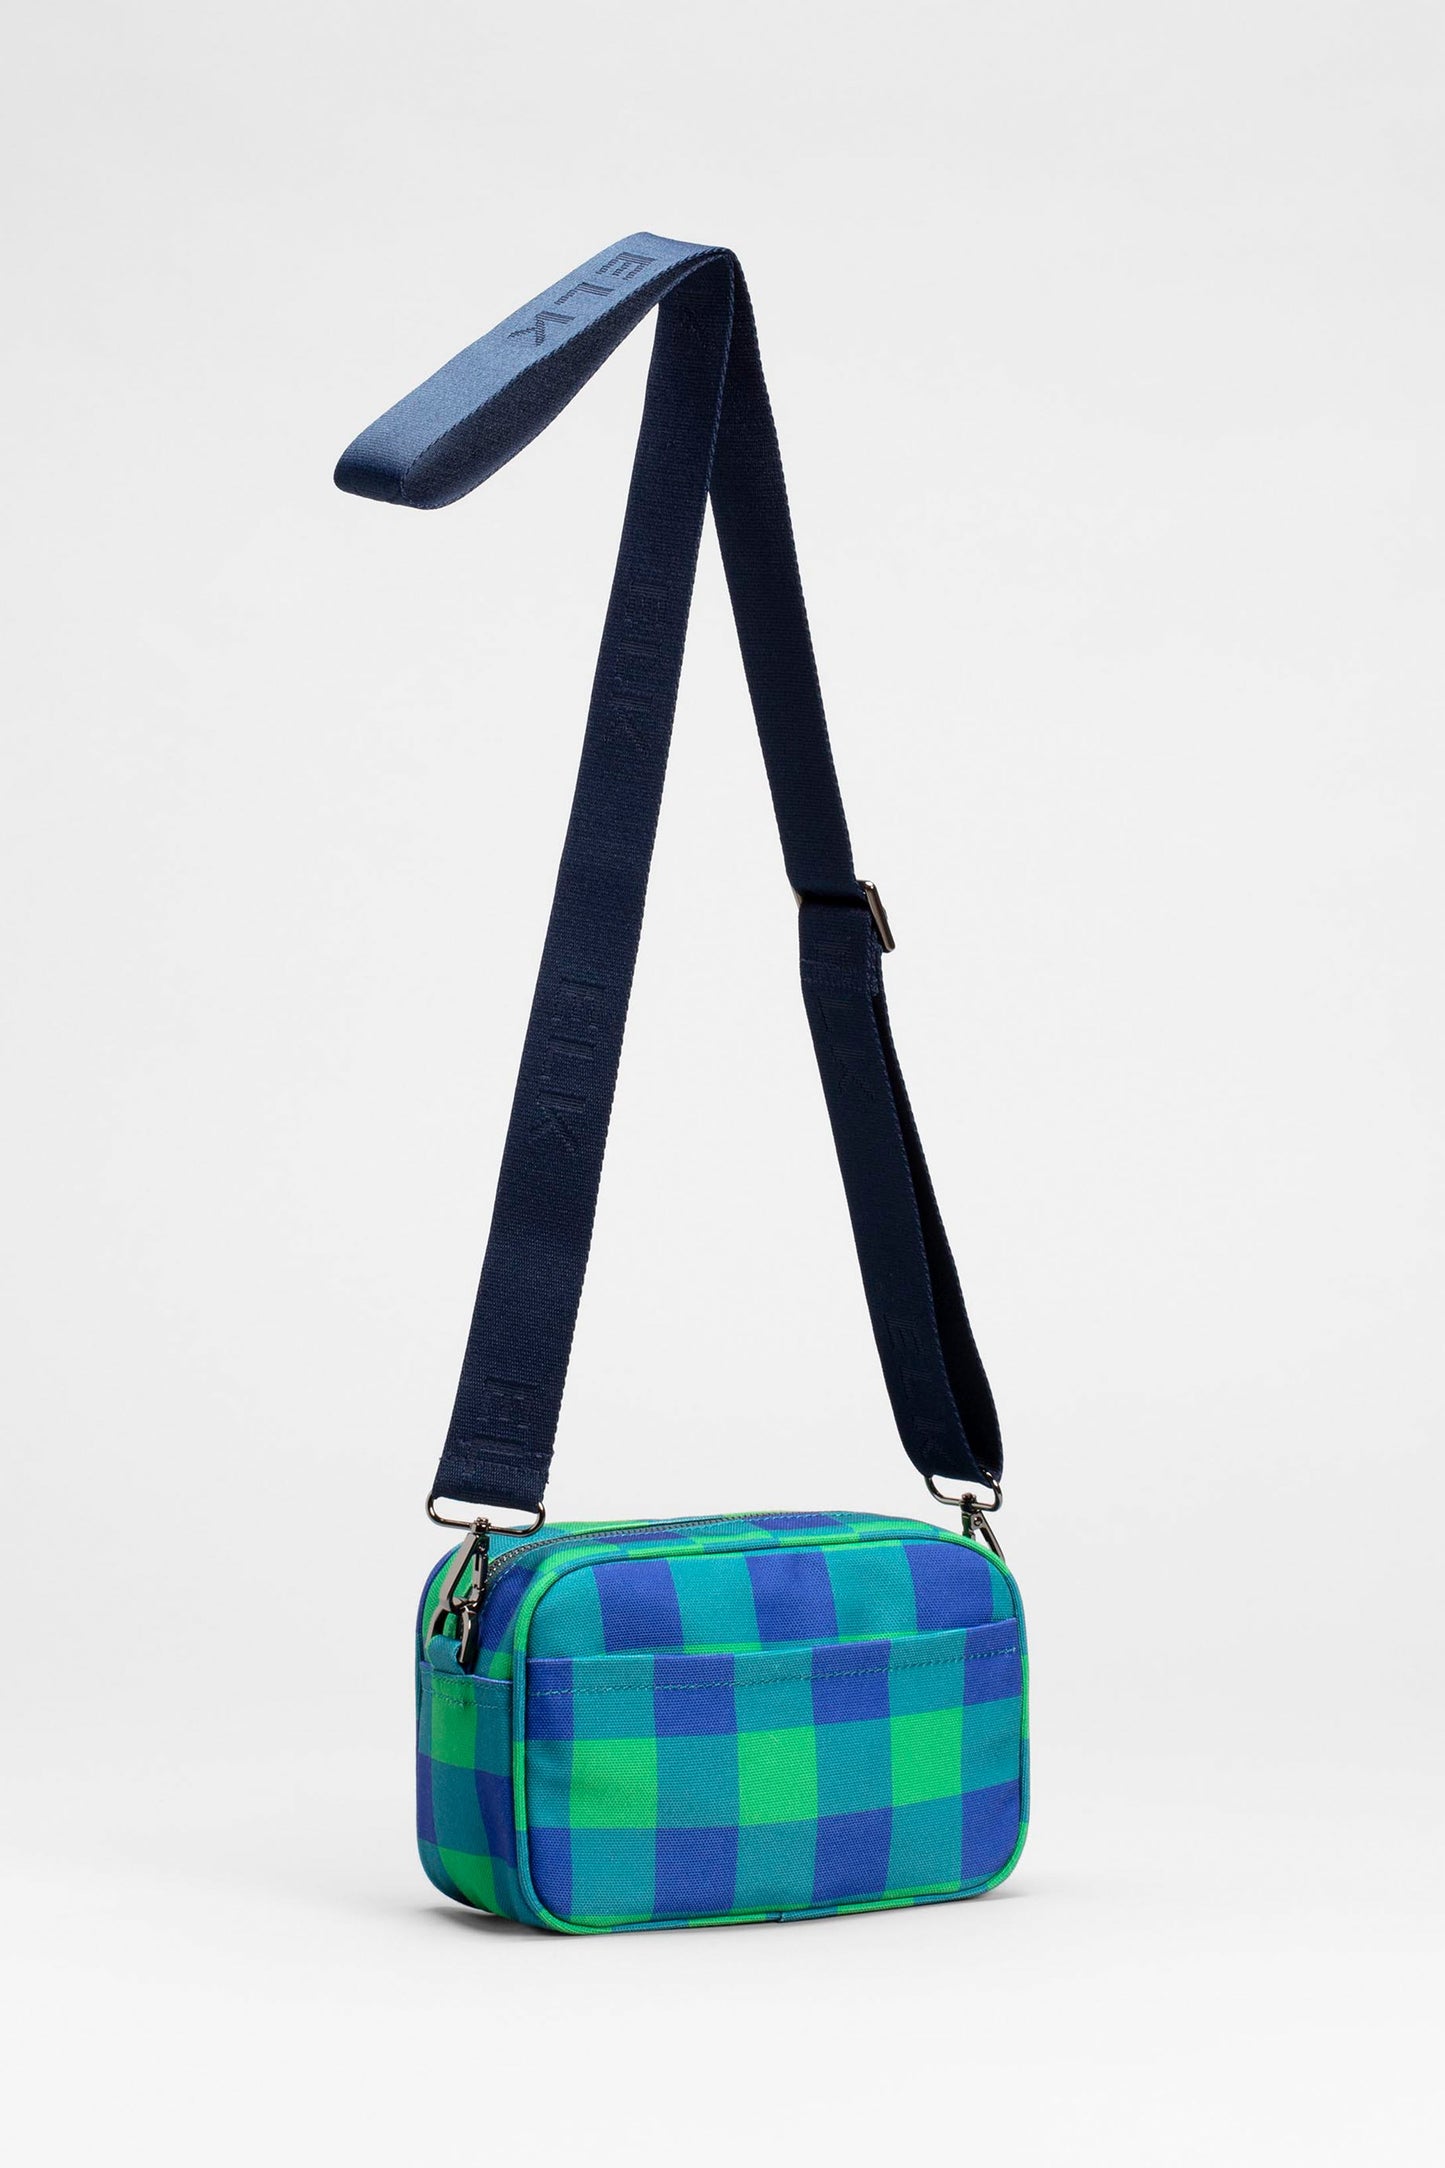 Kassel Recycled Fabric Gingham Print Zip Up Cross Body Bag Back | ELECTRIC BLUE GREEN GINGHAM